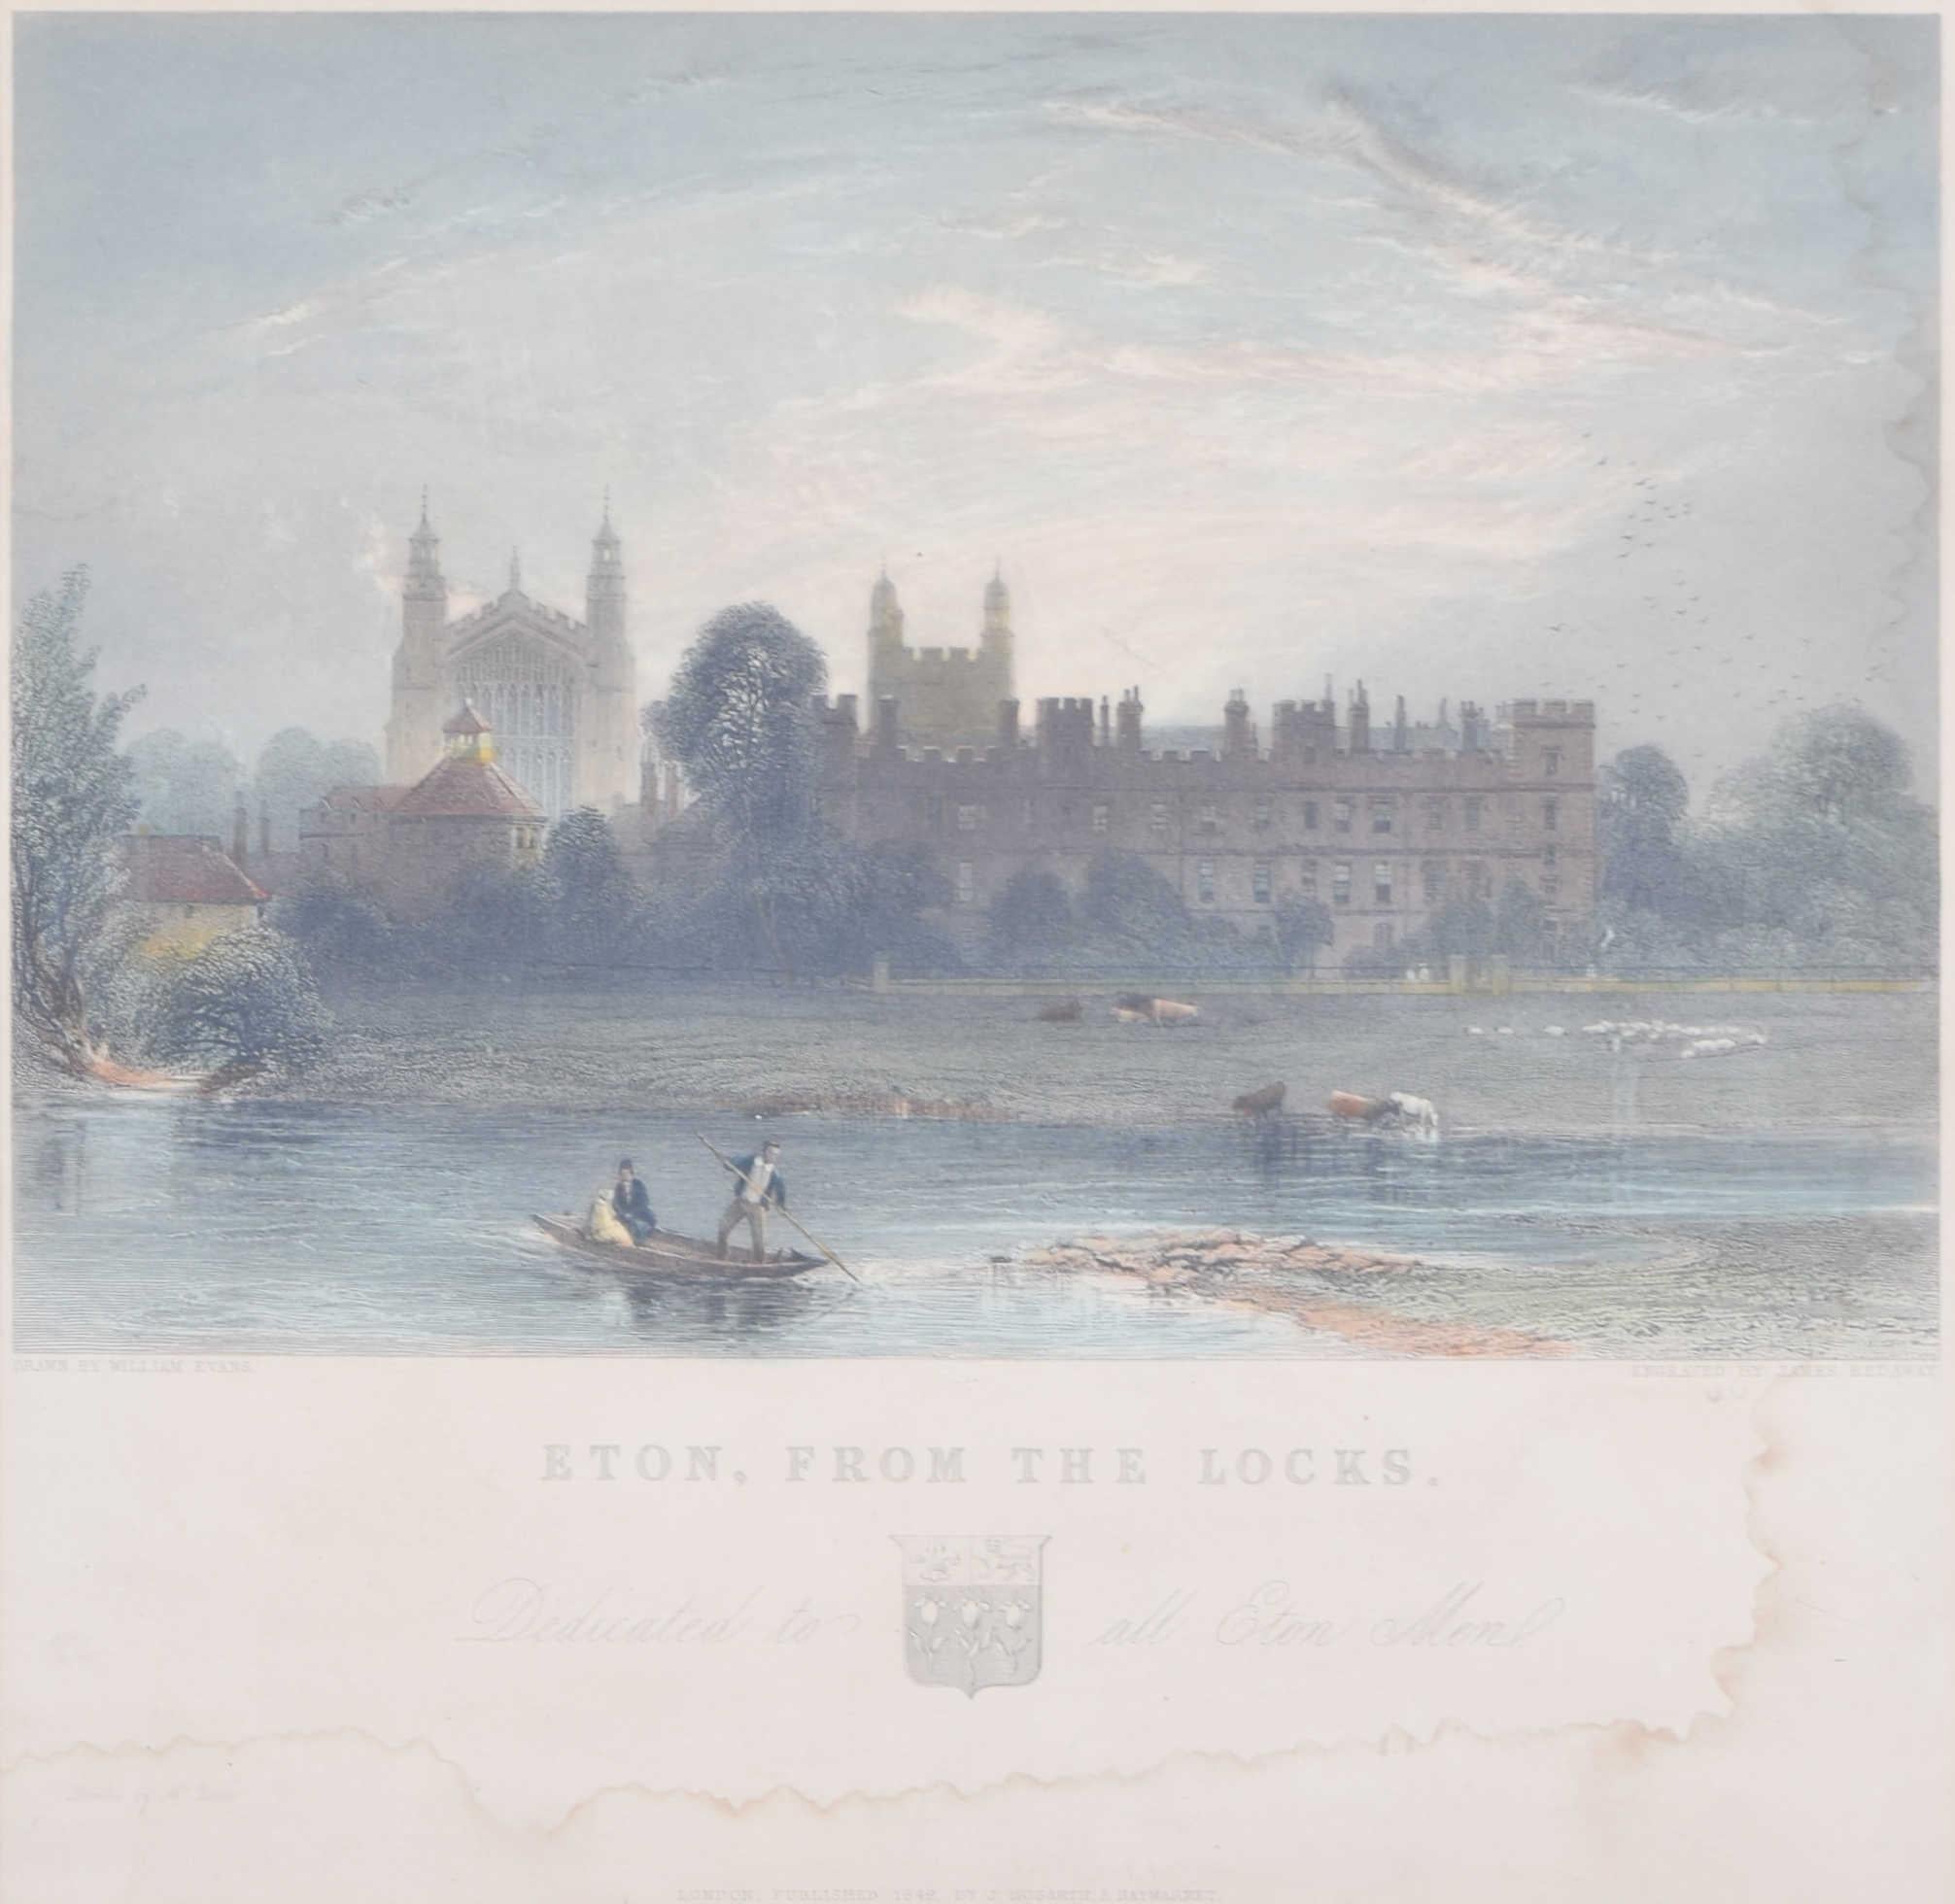 J Lewis Landscape Painting - Eton from the Locks 19th century hand-coloured engraving by James Redaway